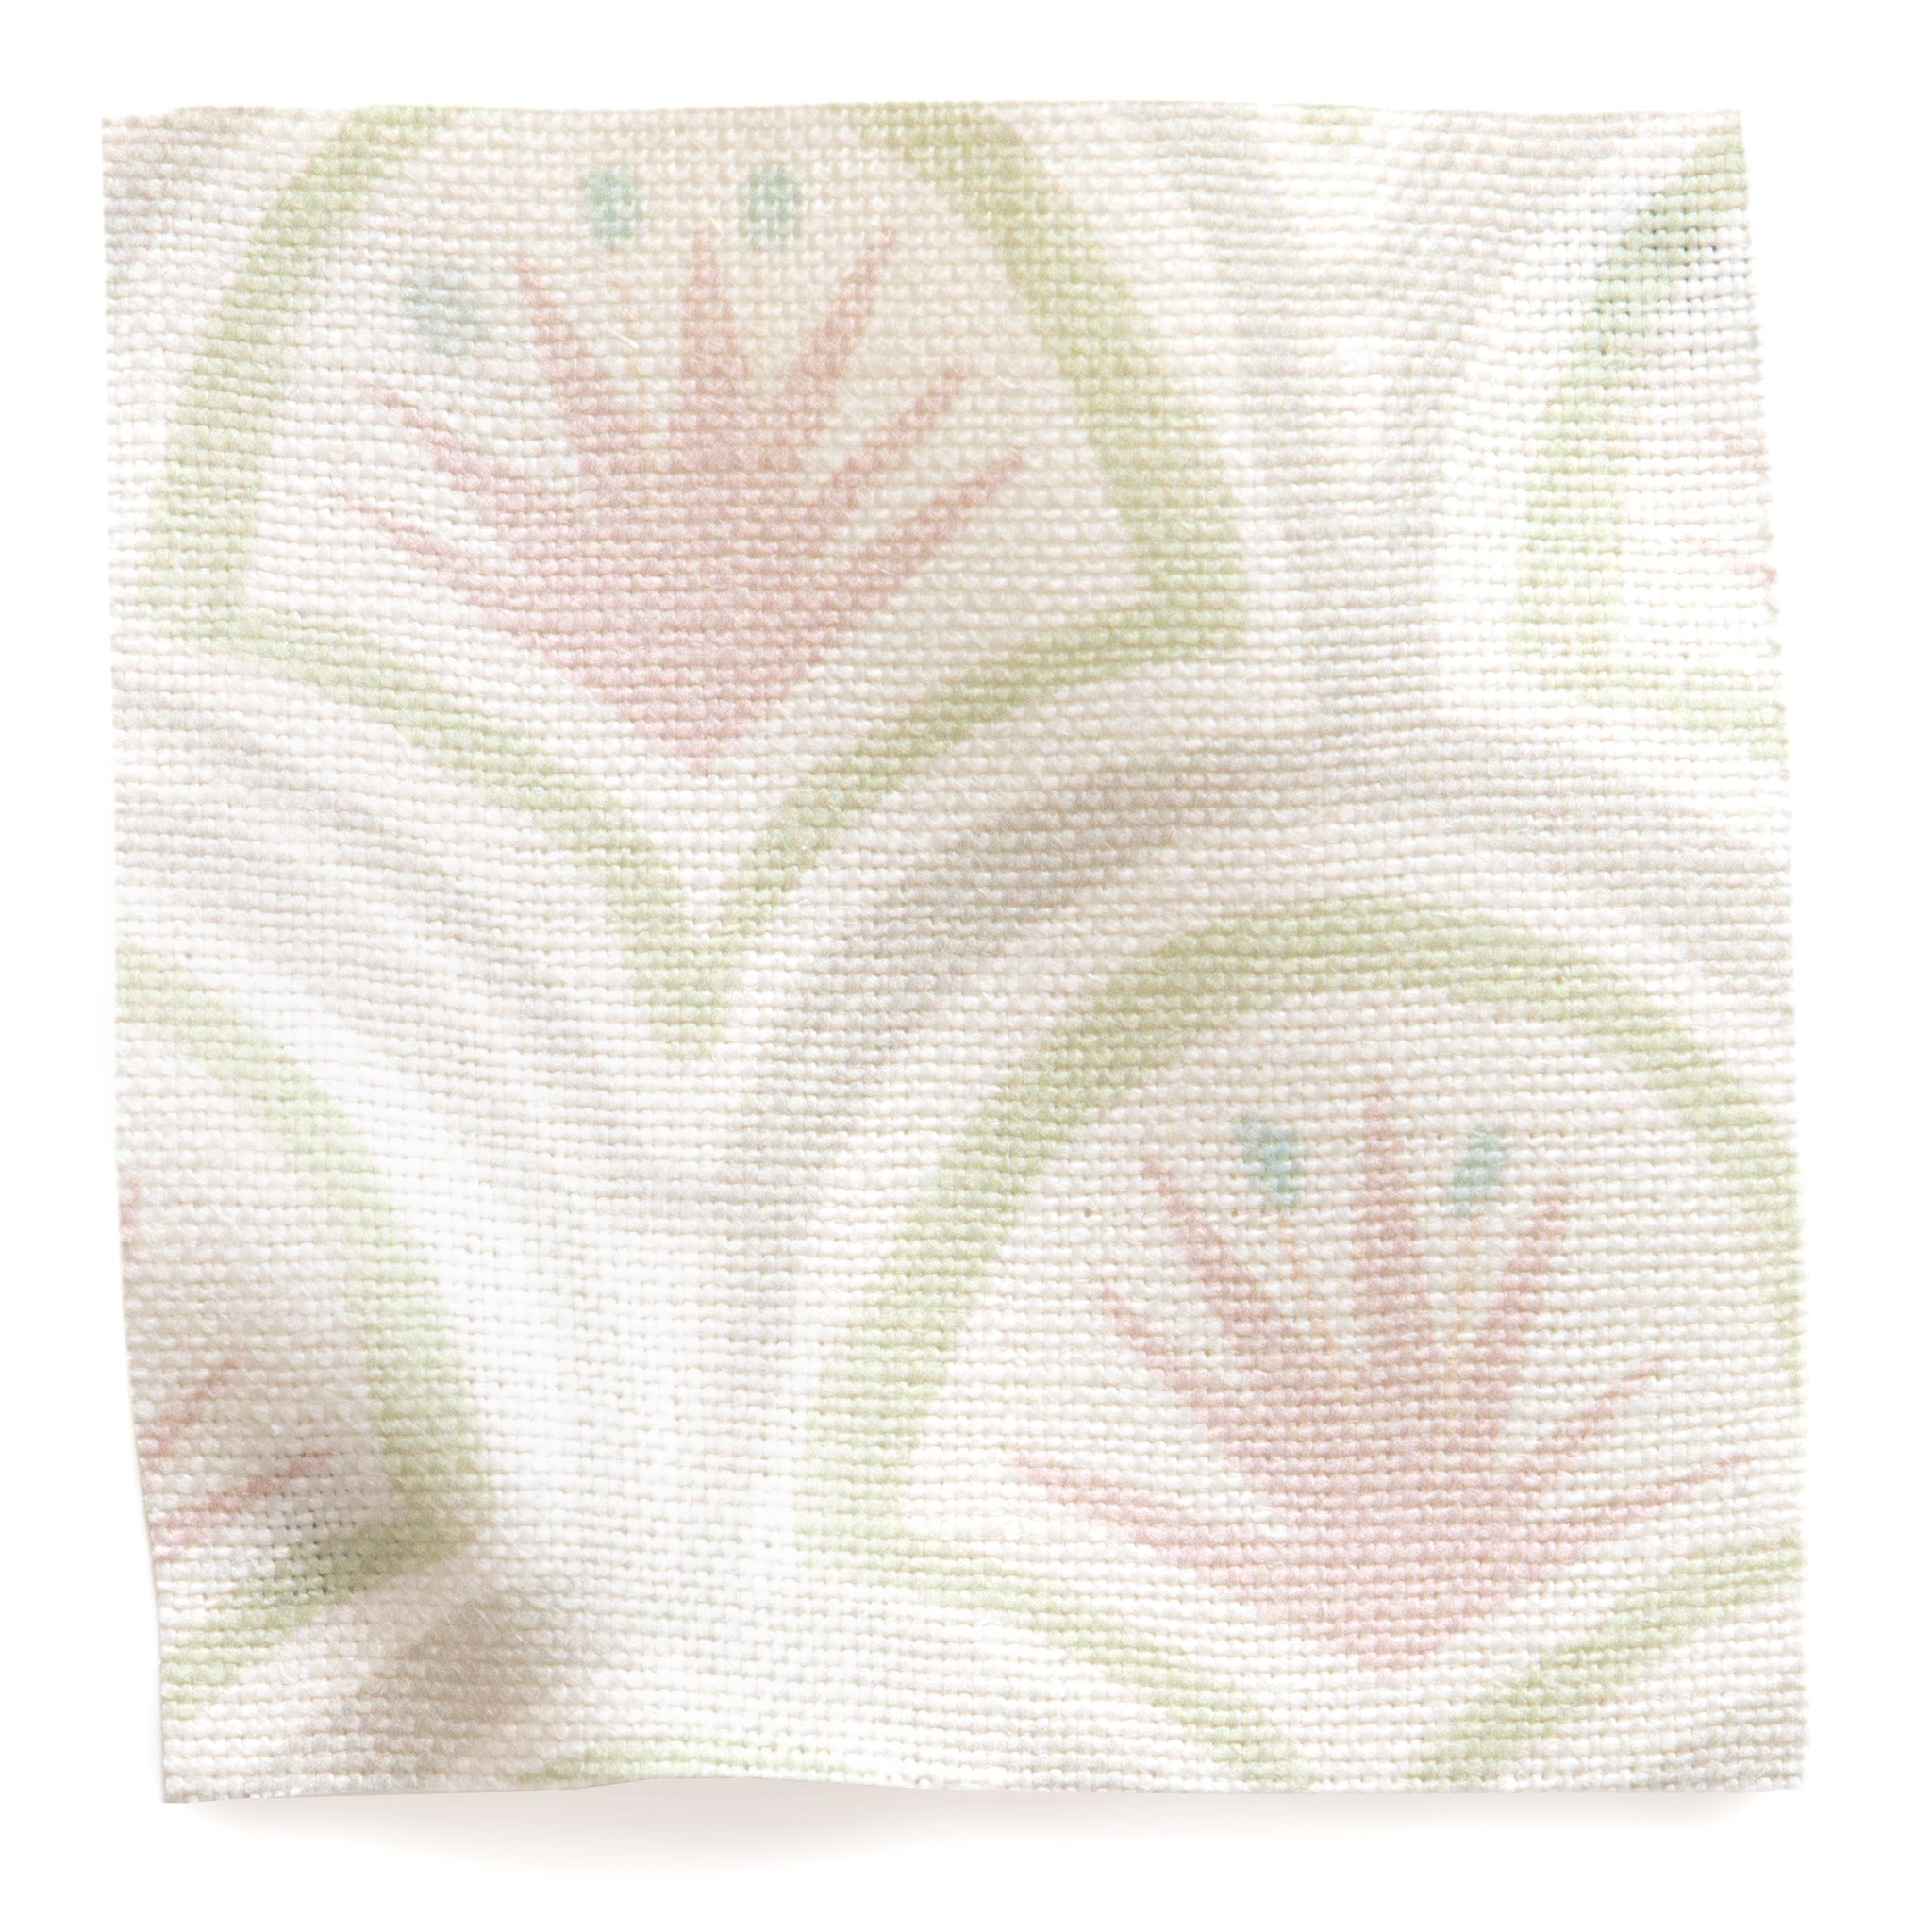 Pink Art Deco Palm Printed Linen Swatch